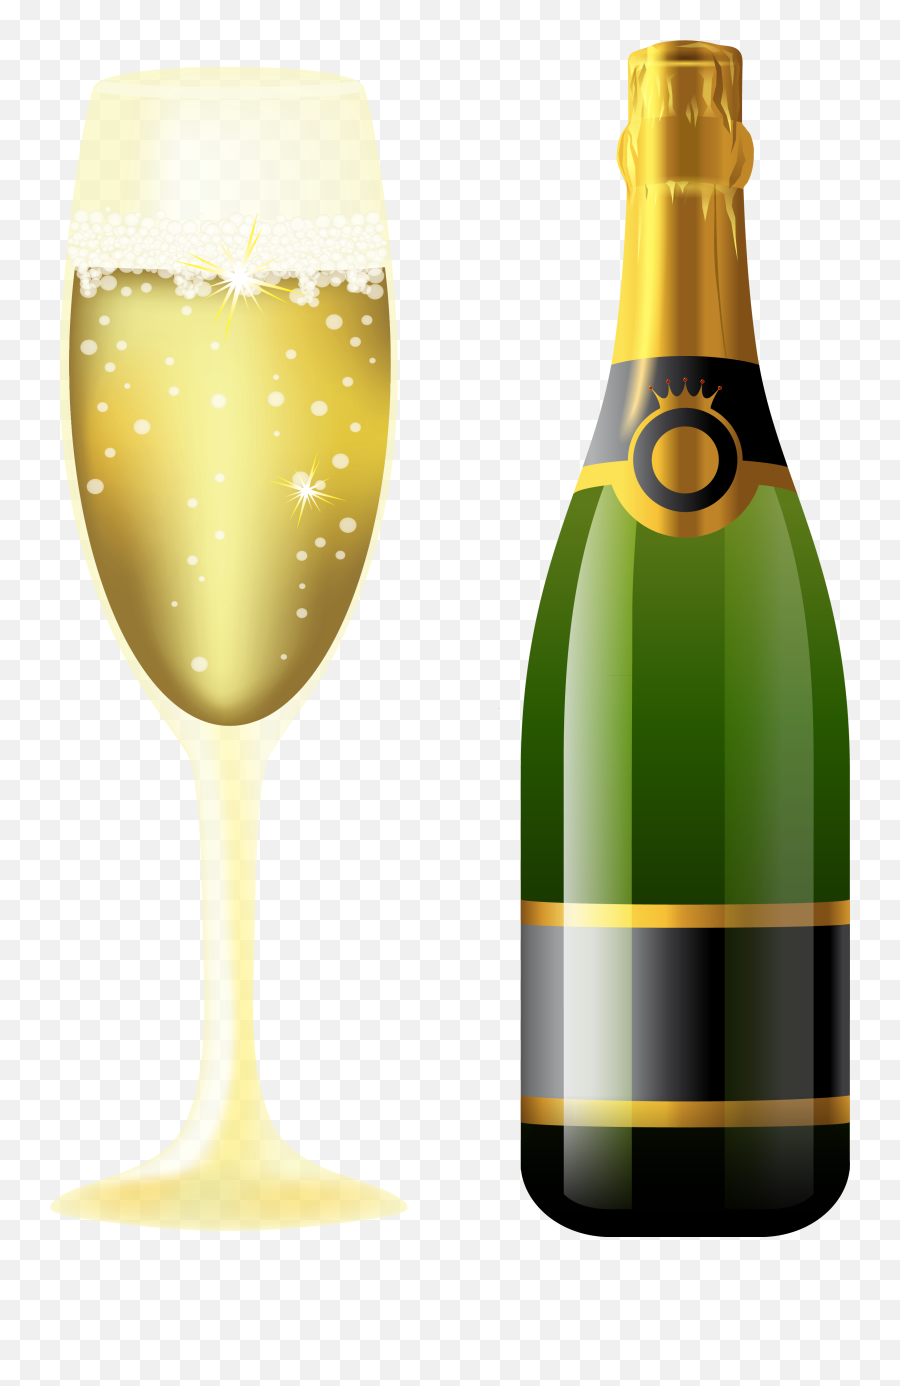 Free White Wine Bottle Png Download Free White Wine Bottle Emoji,Wine Bottle And Glass Clipart